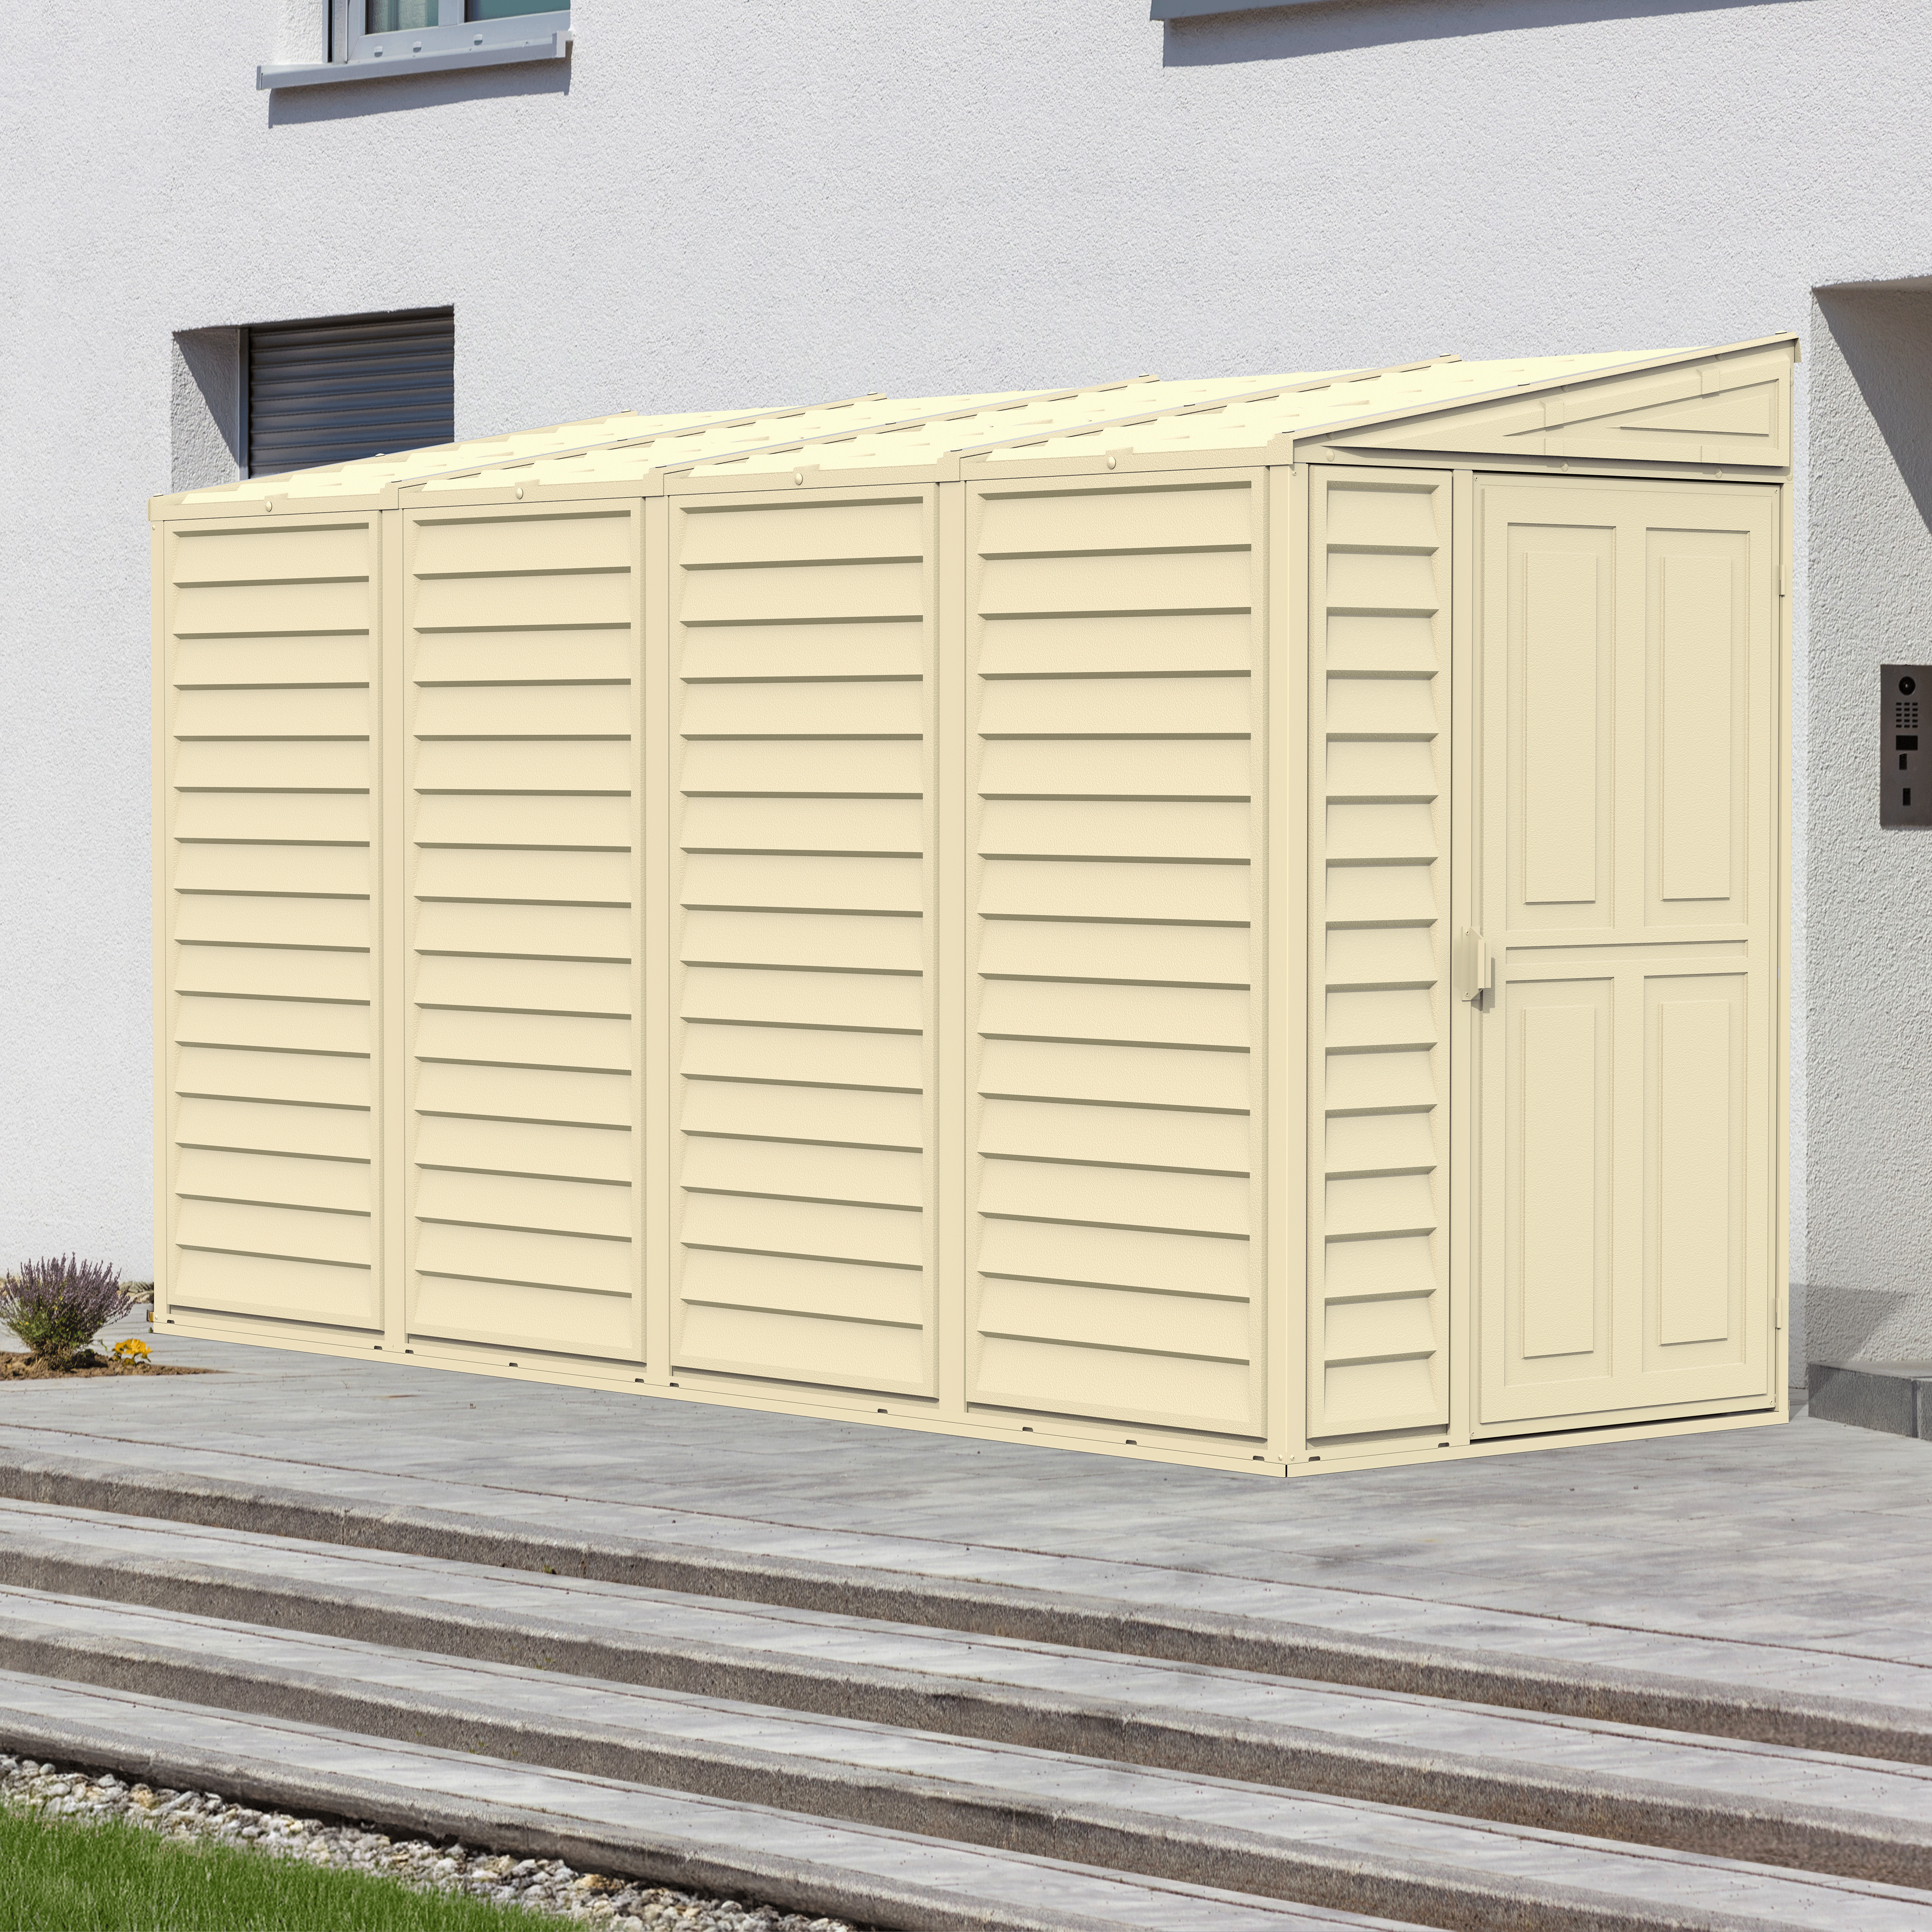 Duramax 4ft x 10ft Sidemate Vinyl Resin Outdoor Storage Shed